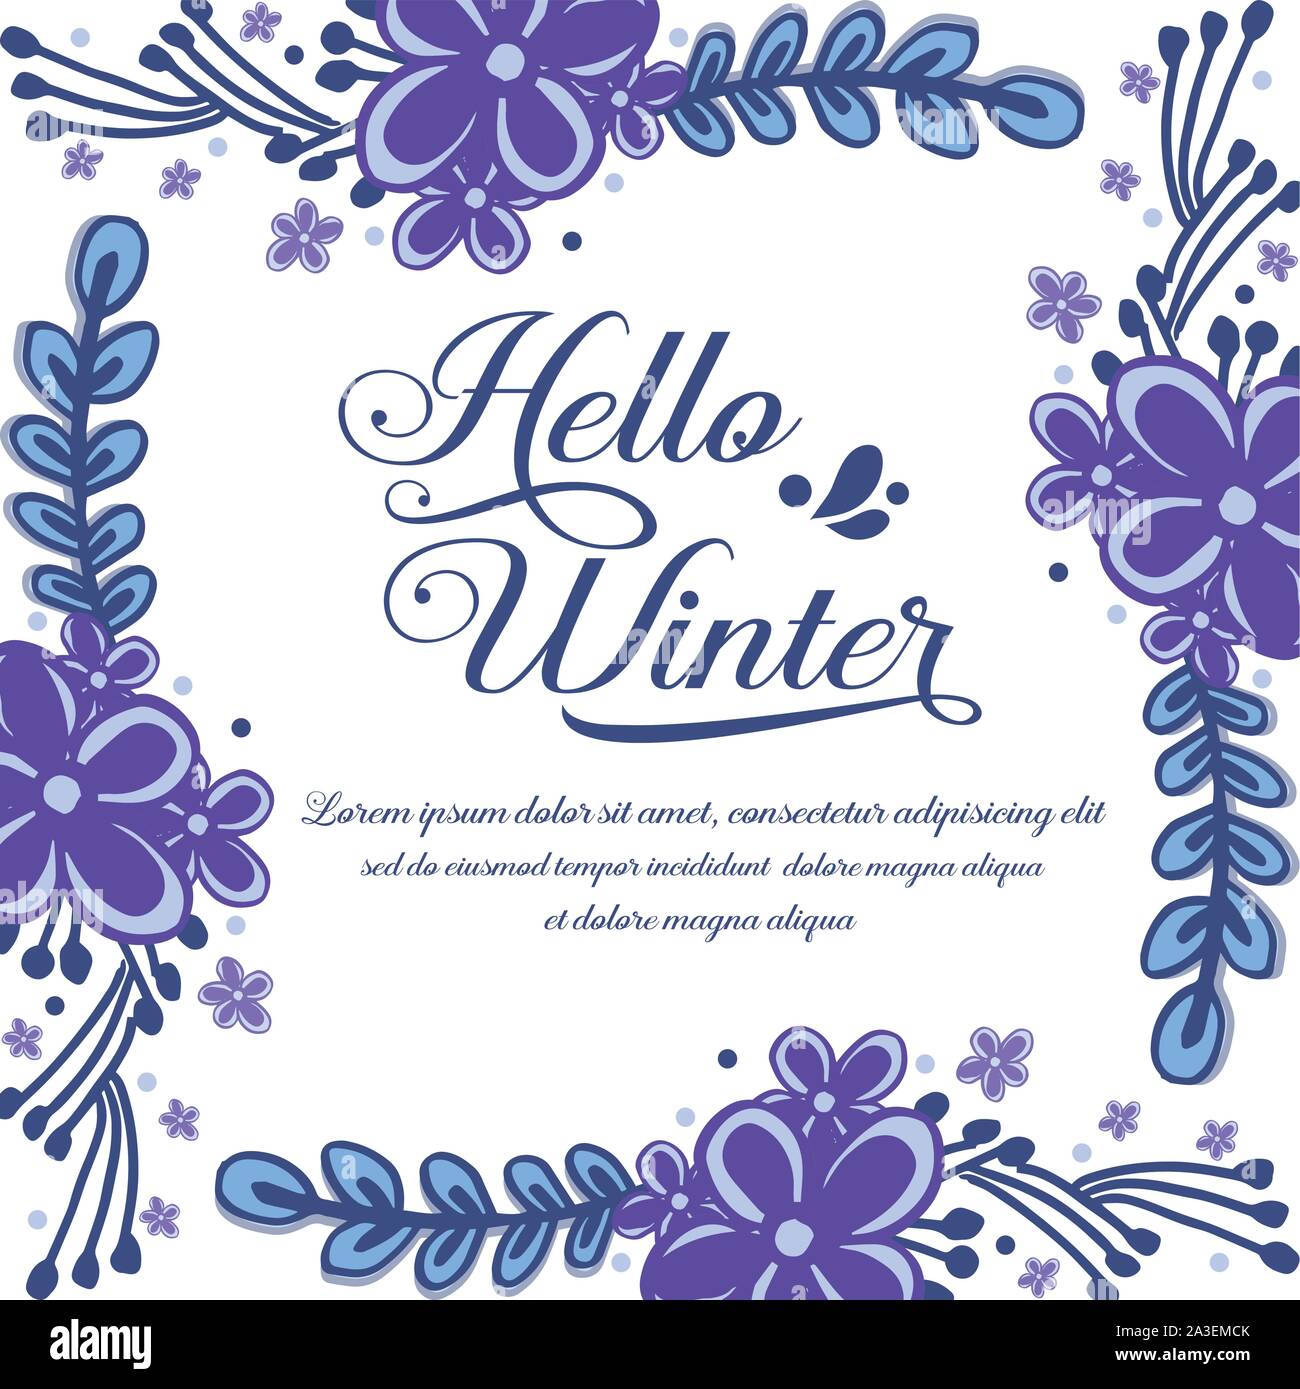 Wallpaper of card hello winter, with design drawing of purple wreath frame. Vector Stock Vector